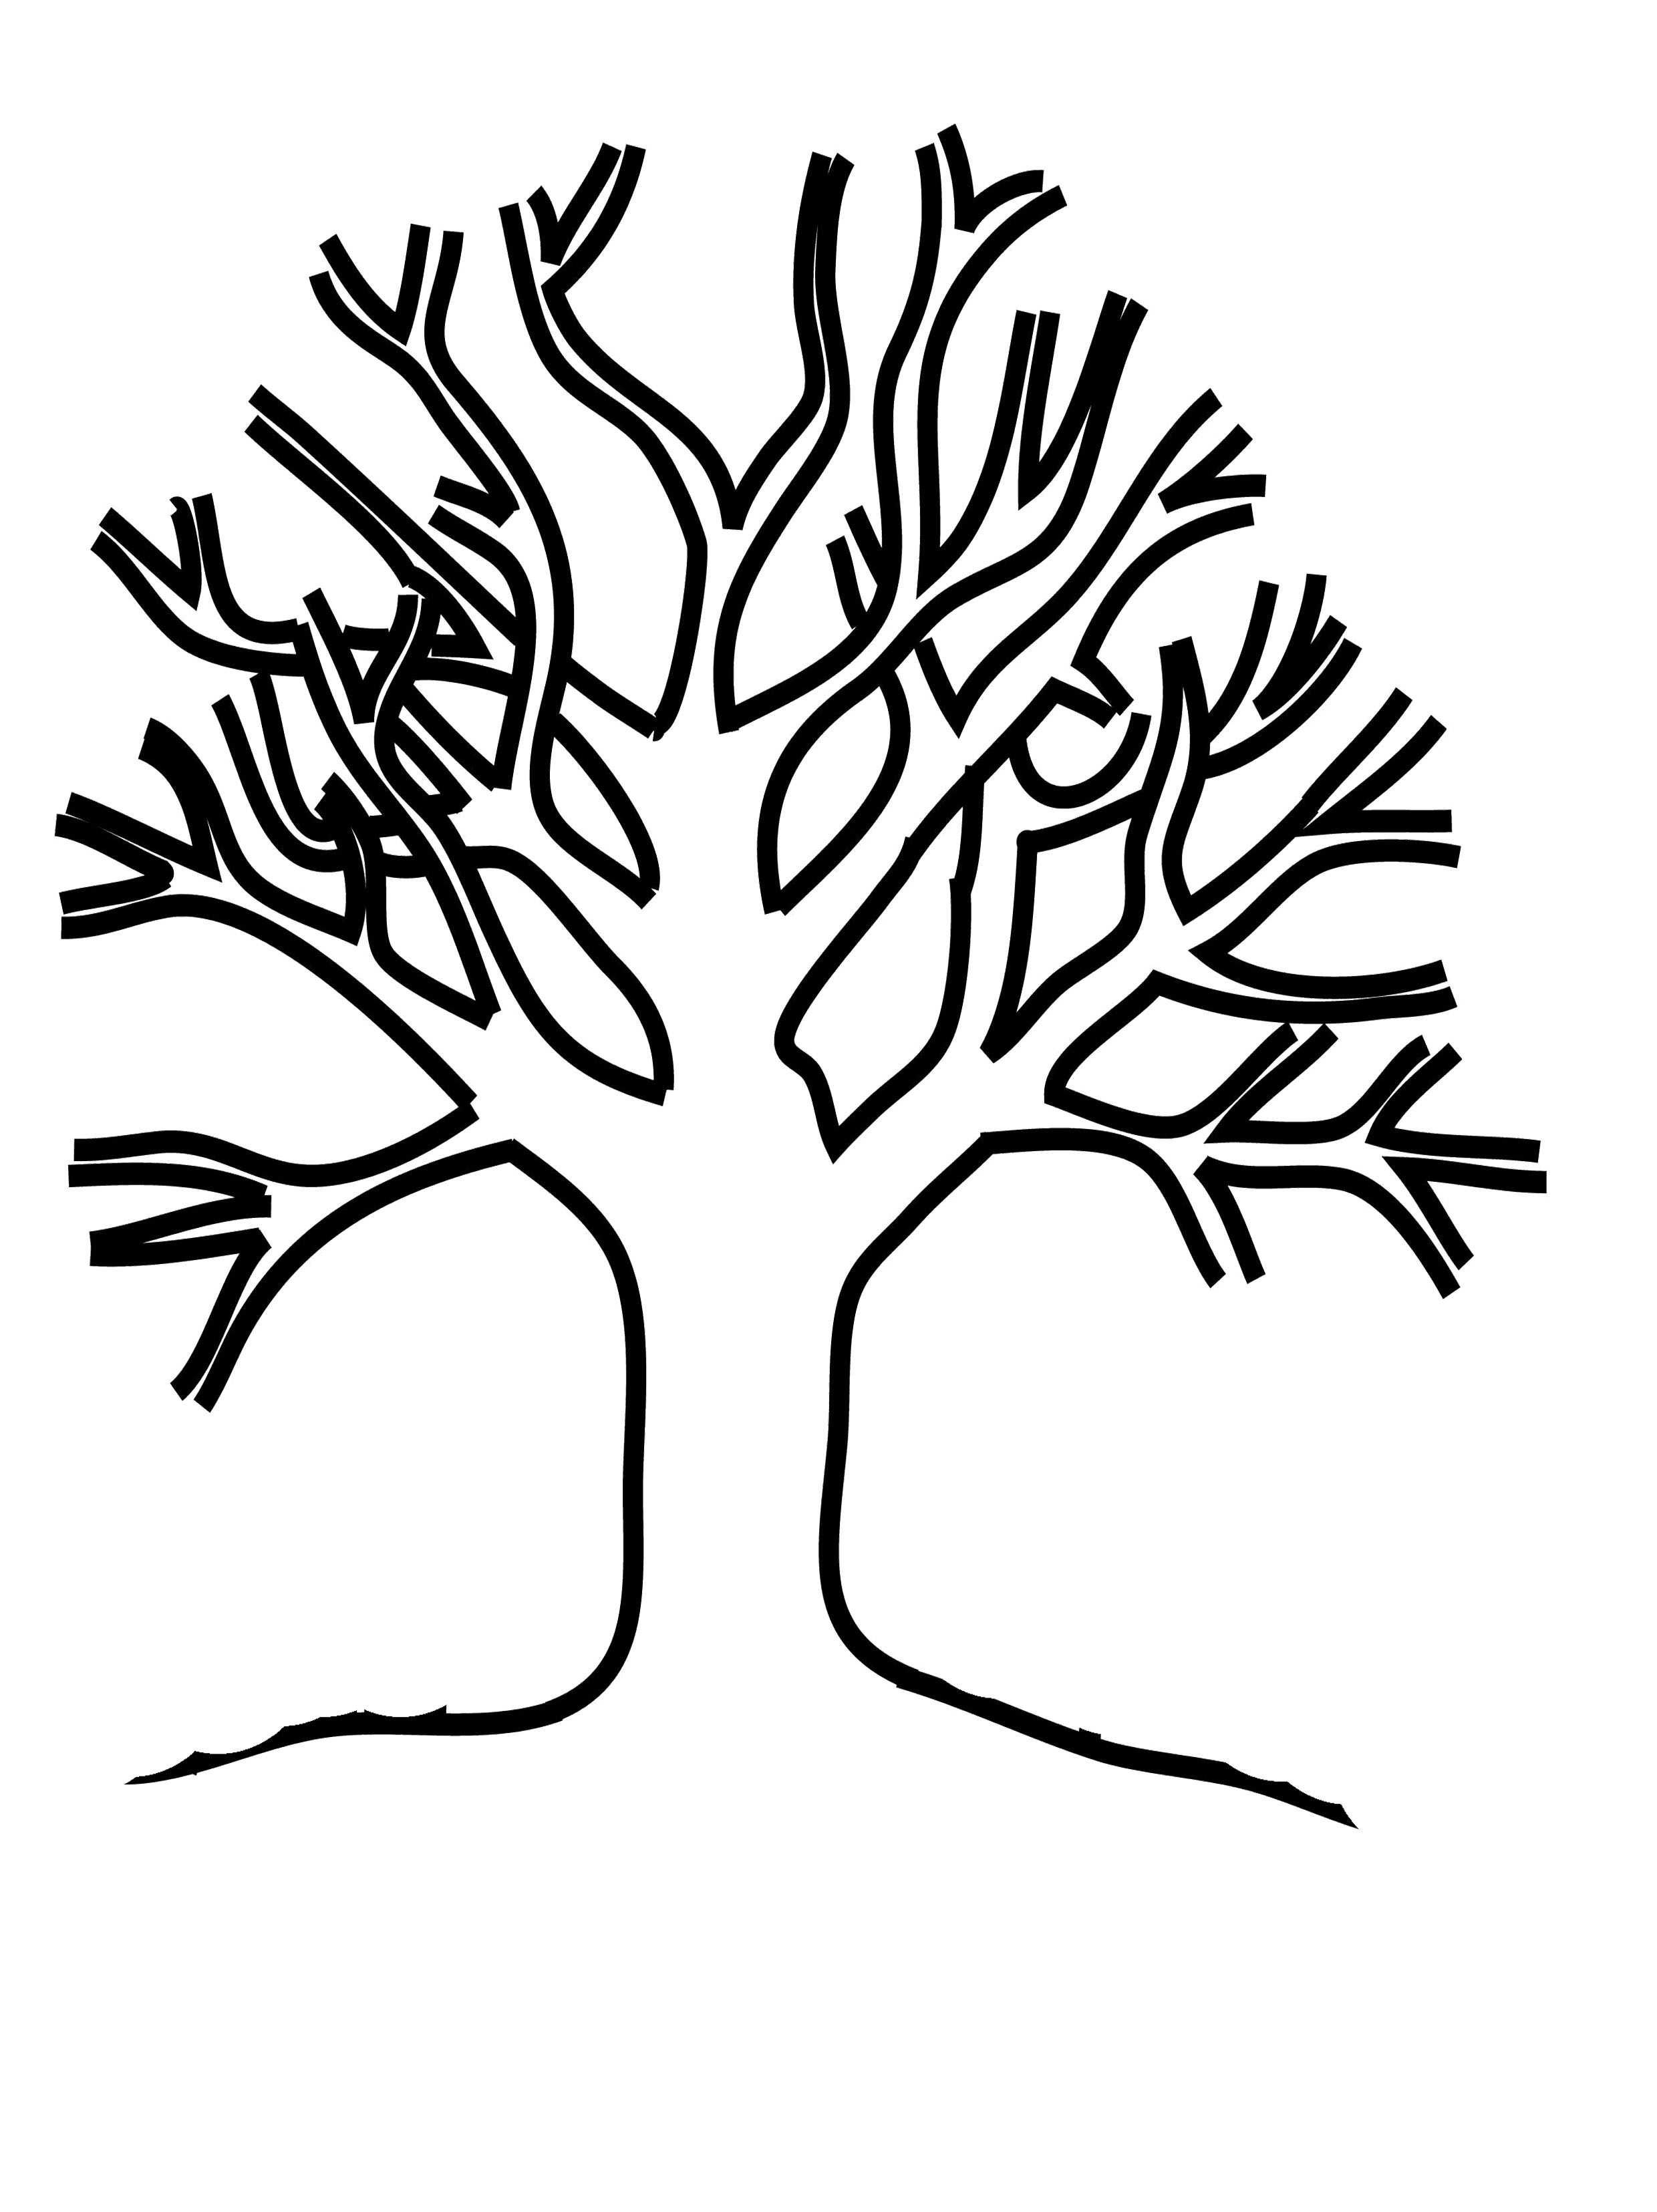 Bare Tree Coloring Page at Free printable colorings pages to print and color